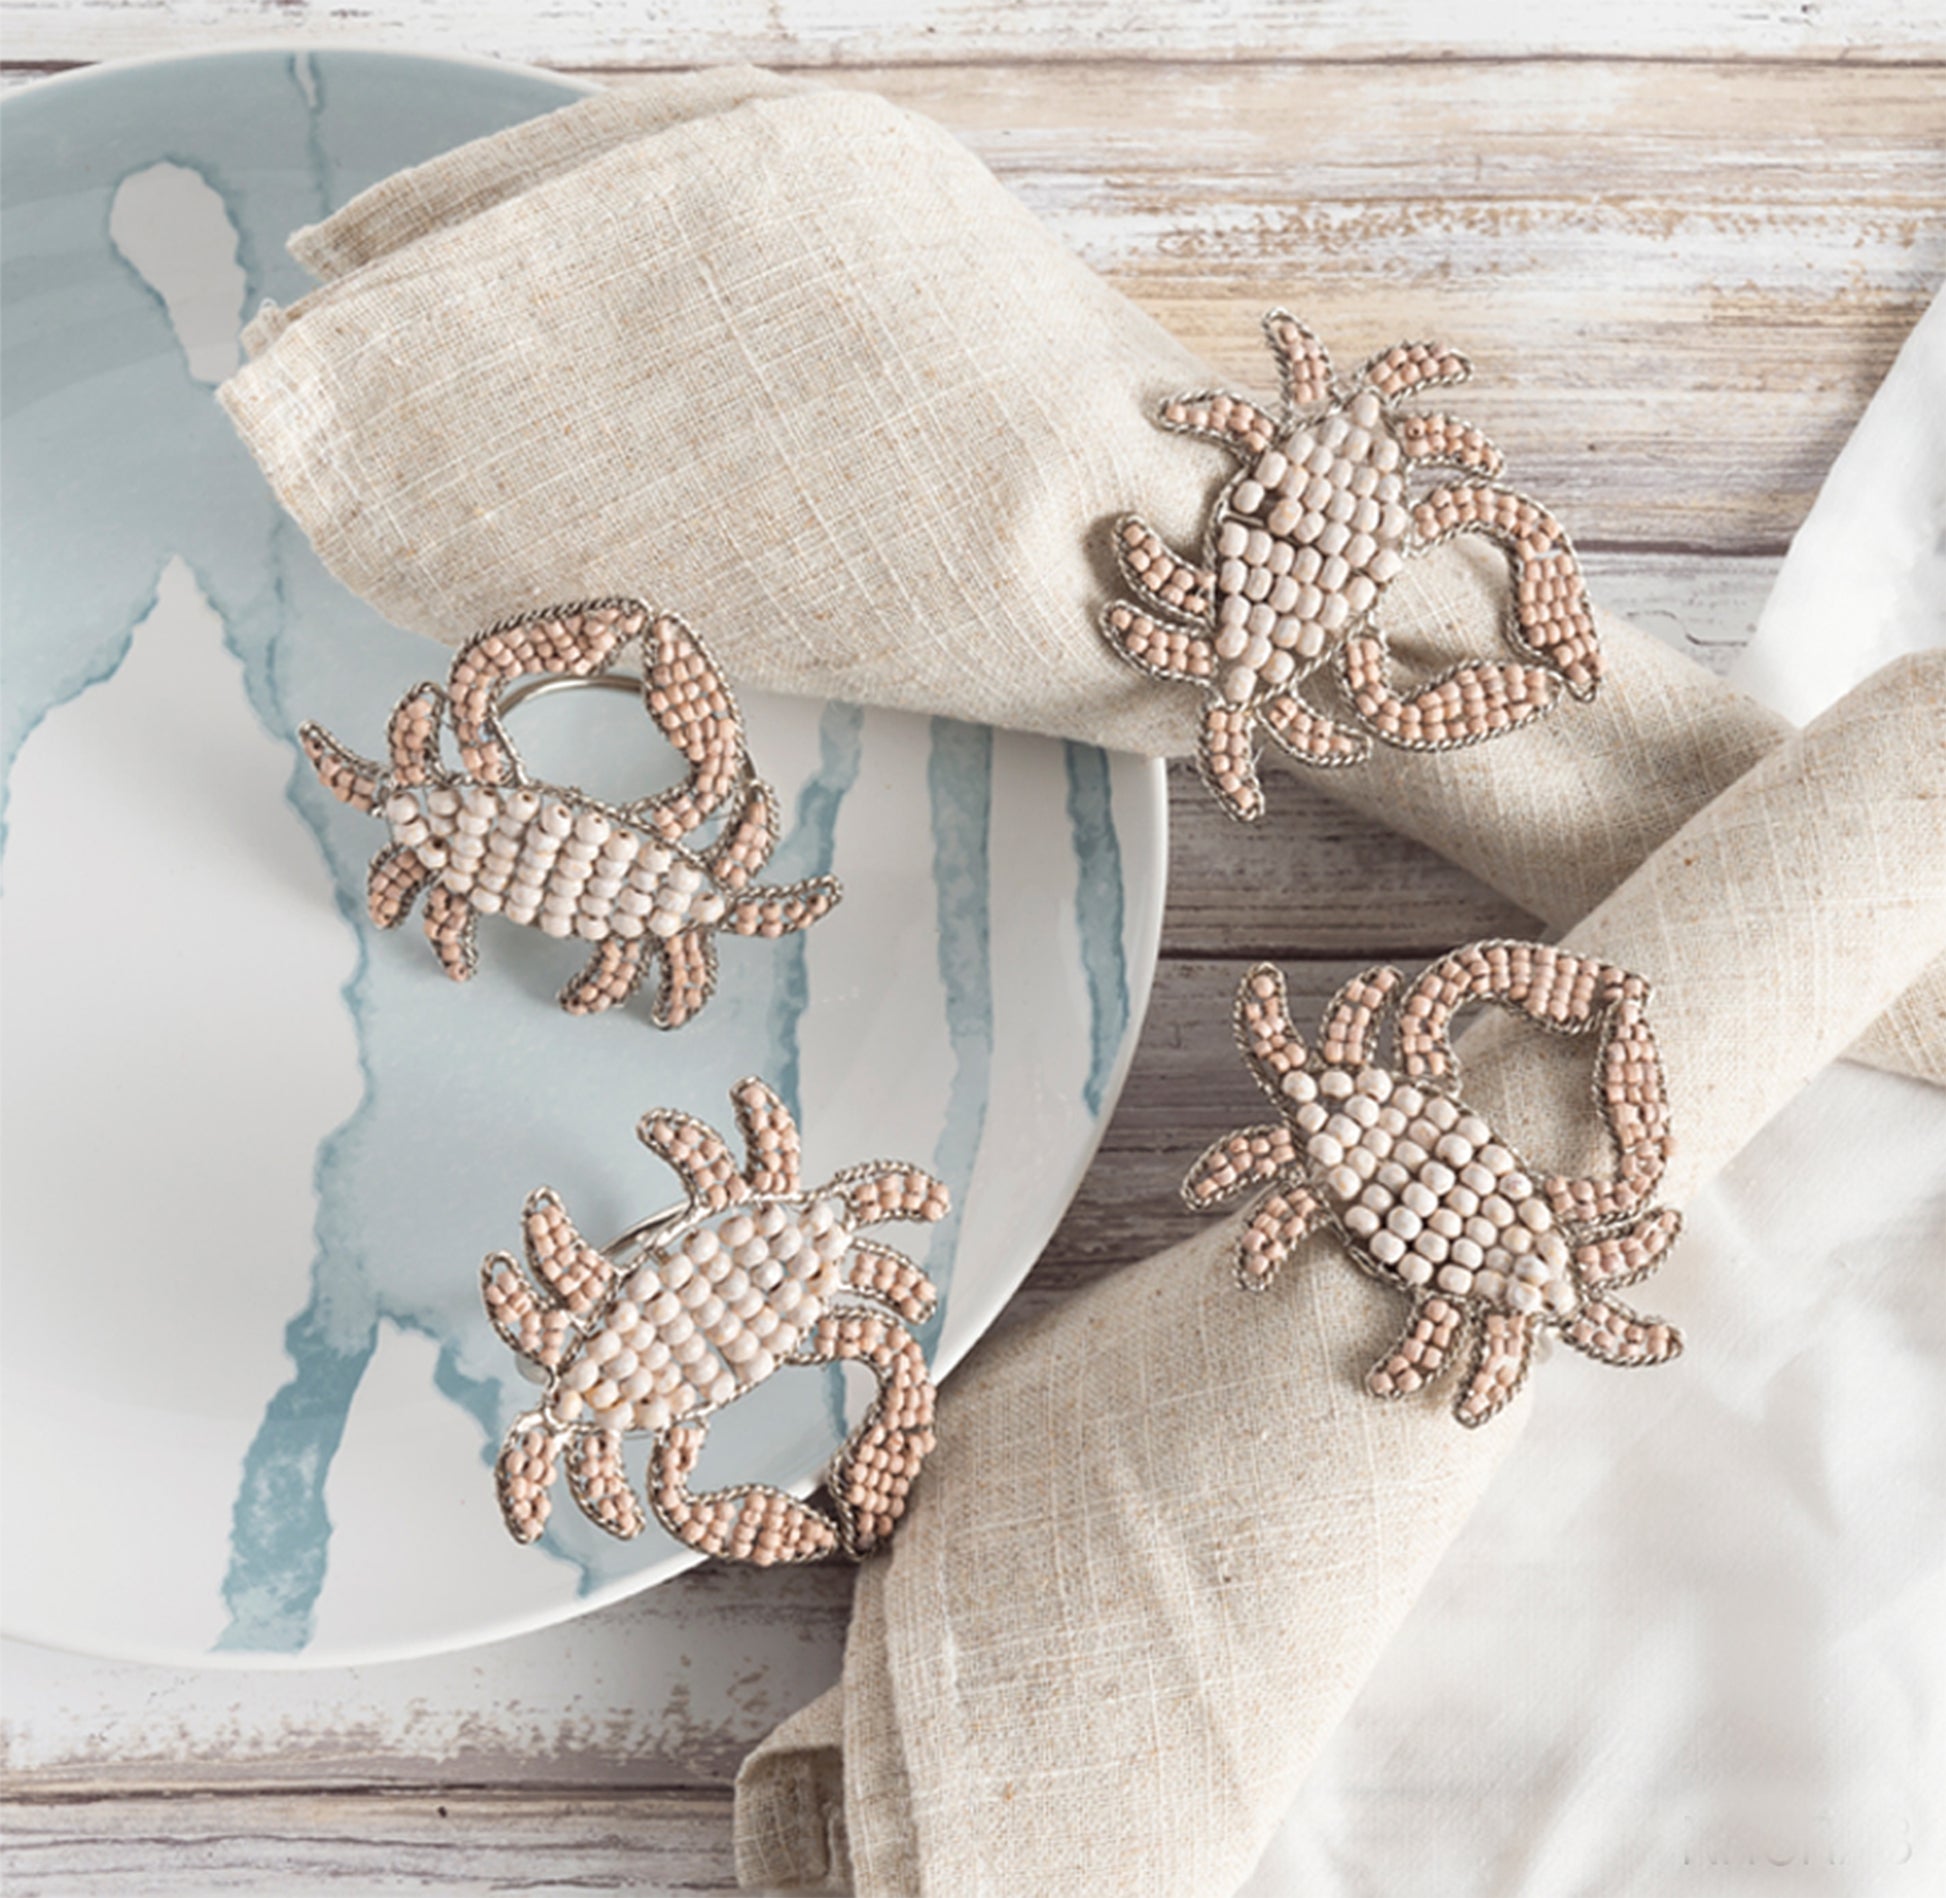 4 crab shaped napkin rings crafted of natural beads.